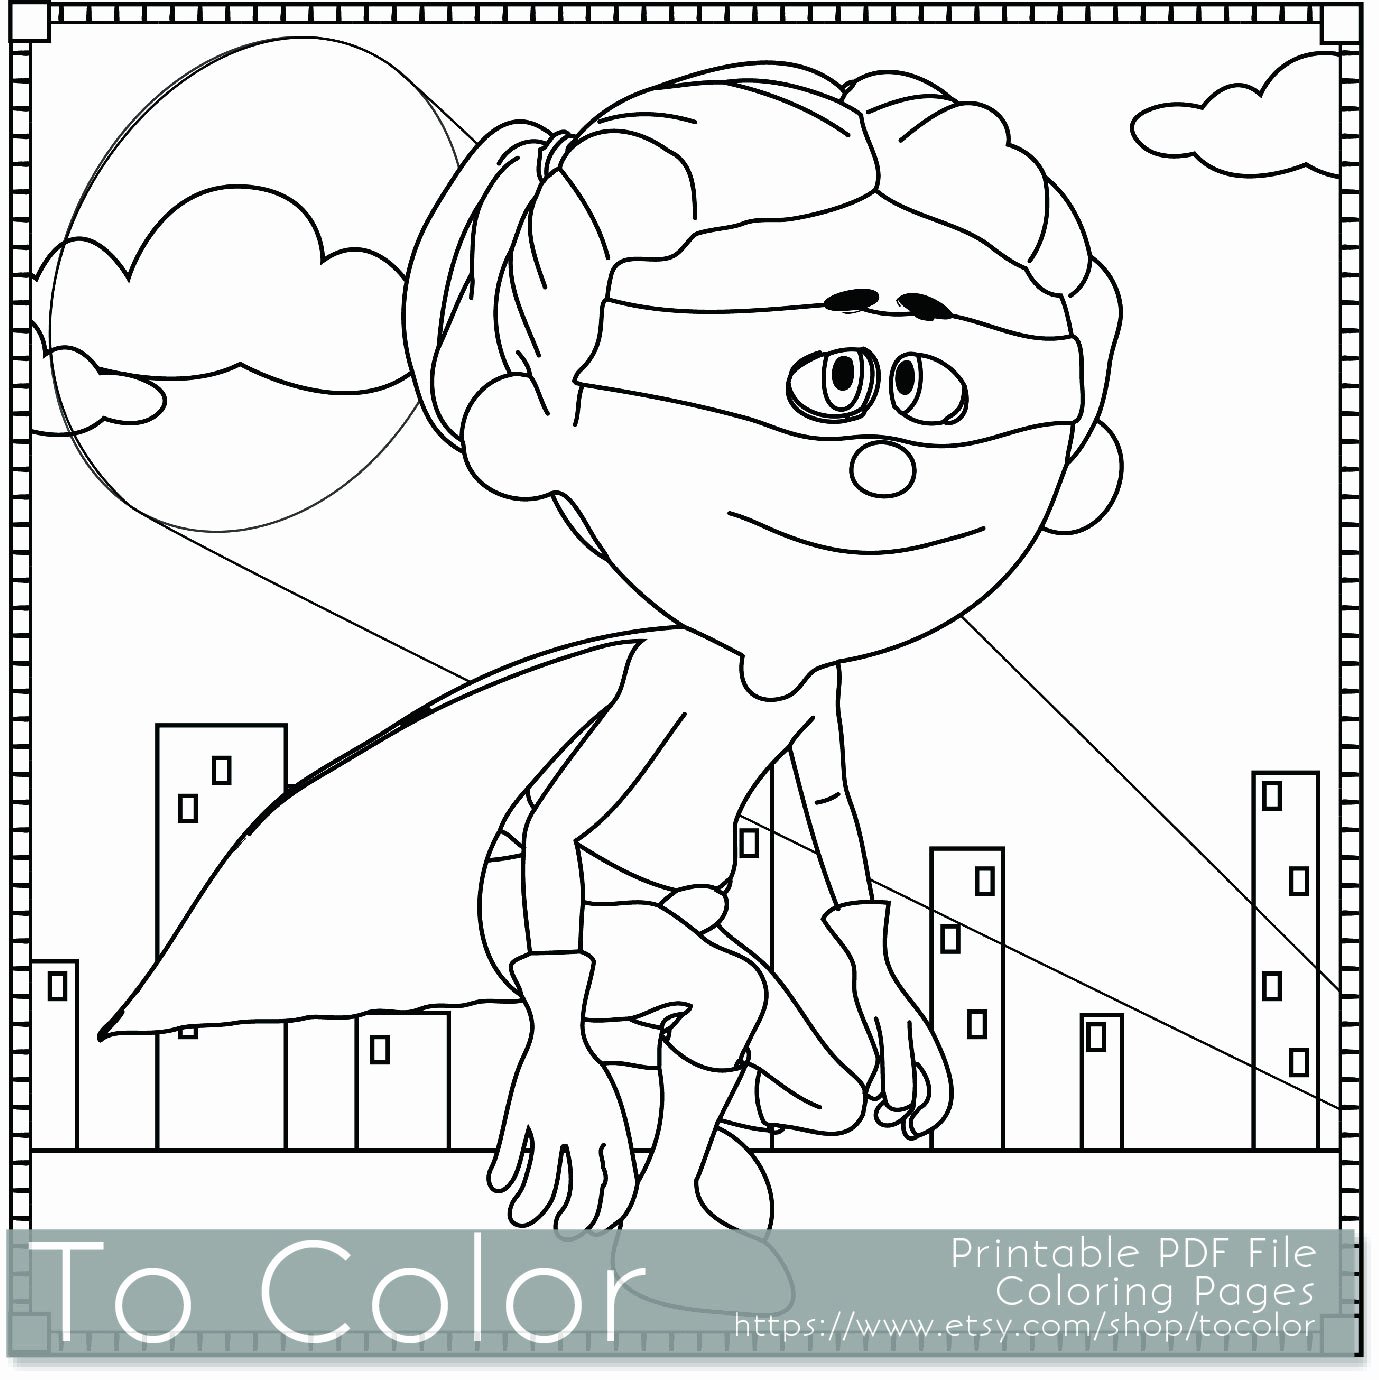 Female Superhero Coloring Pages Luxury Superhero Coloring Page Printable Girl Coloring Page by tocolor